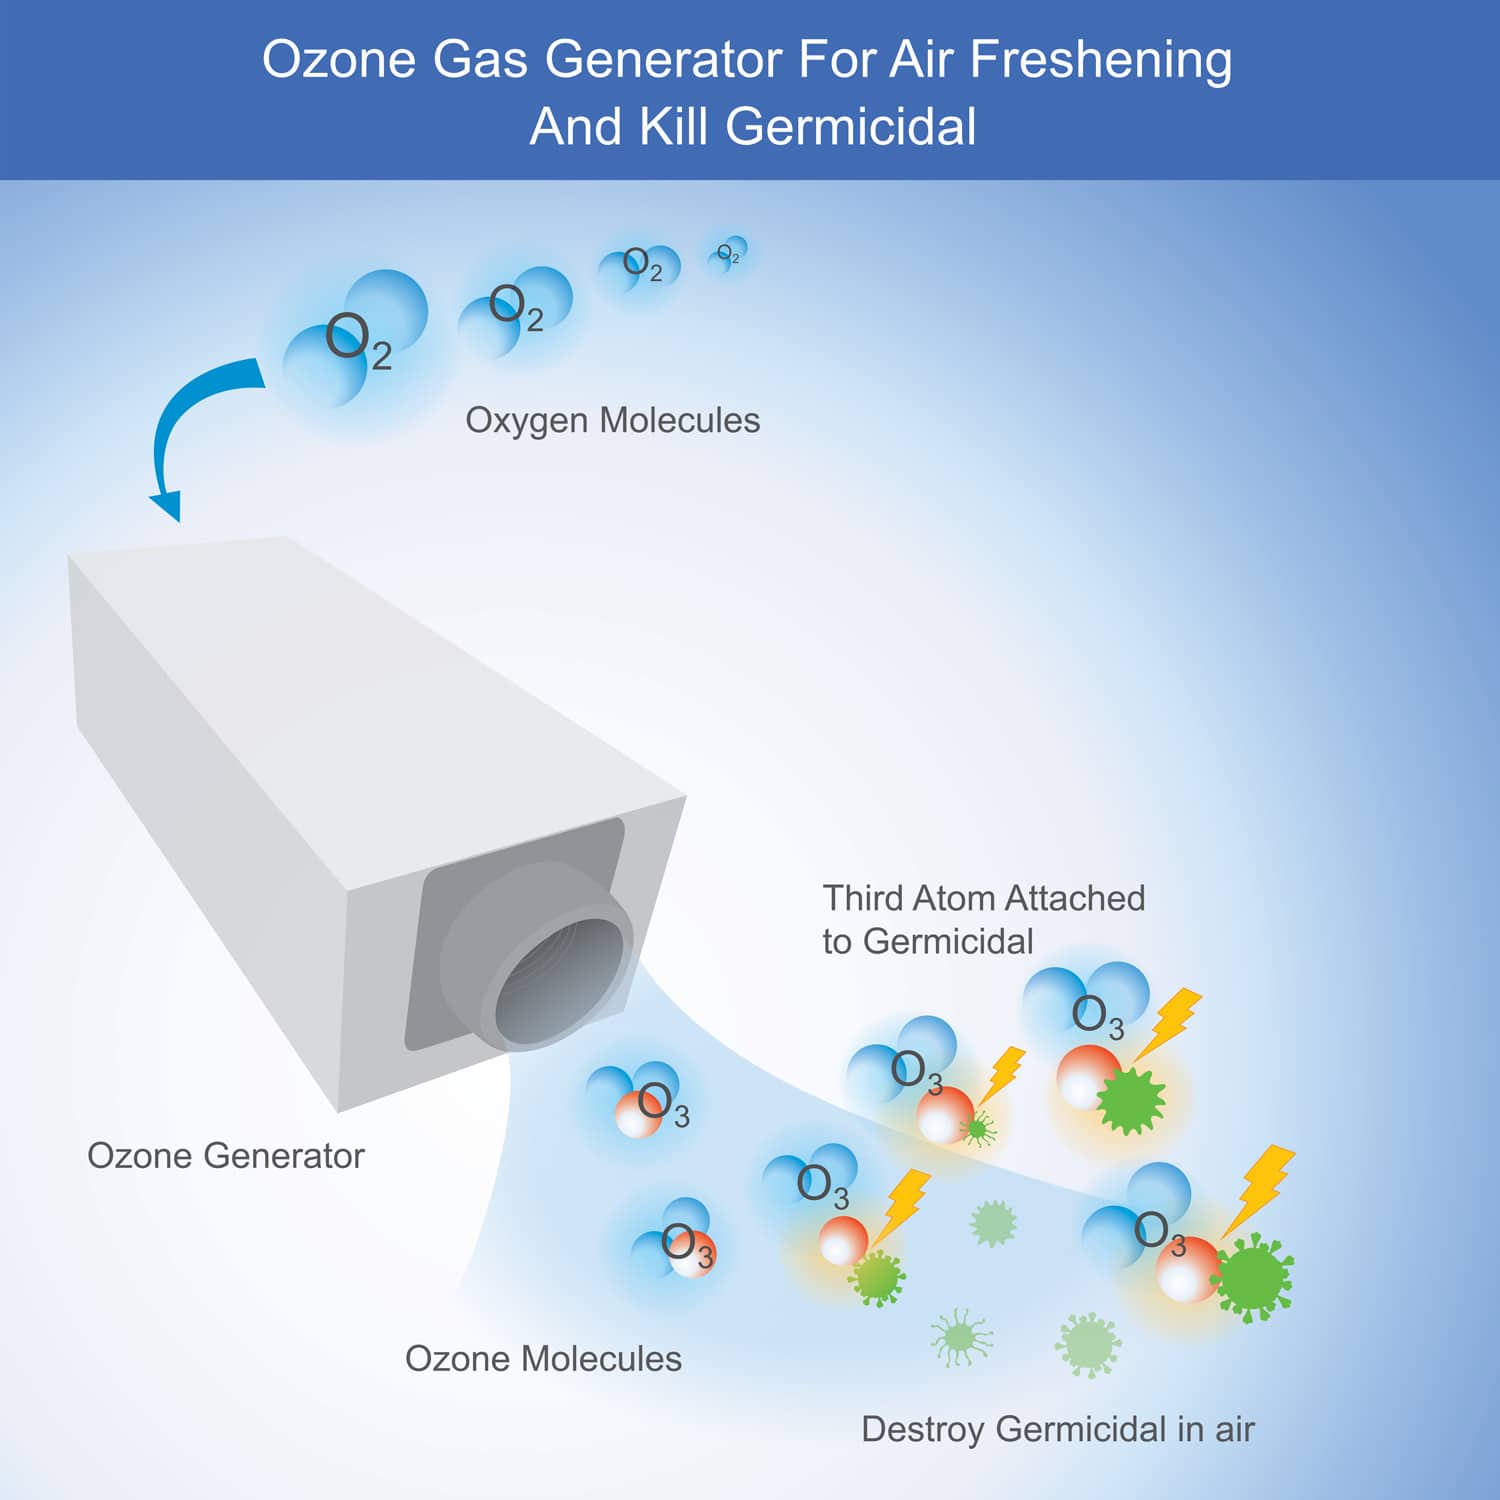 Ozone Gas Generator For Air Freshening And Kill Germicidal. Illustration show how to working Ozone Gas Generator by use high electric charge for kill Germicidal in air.